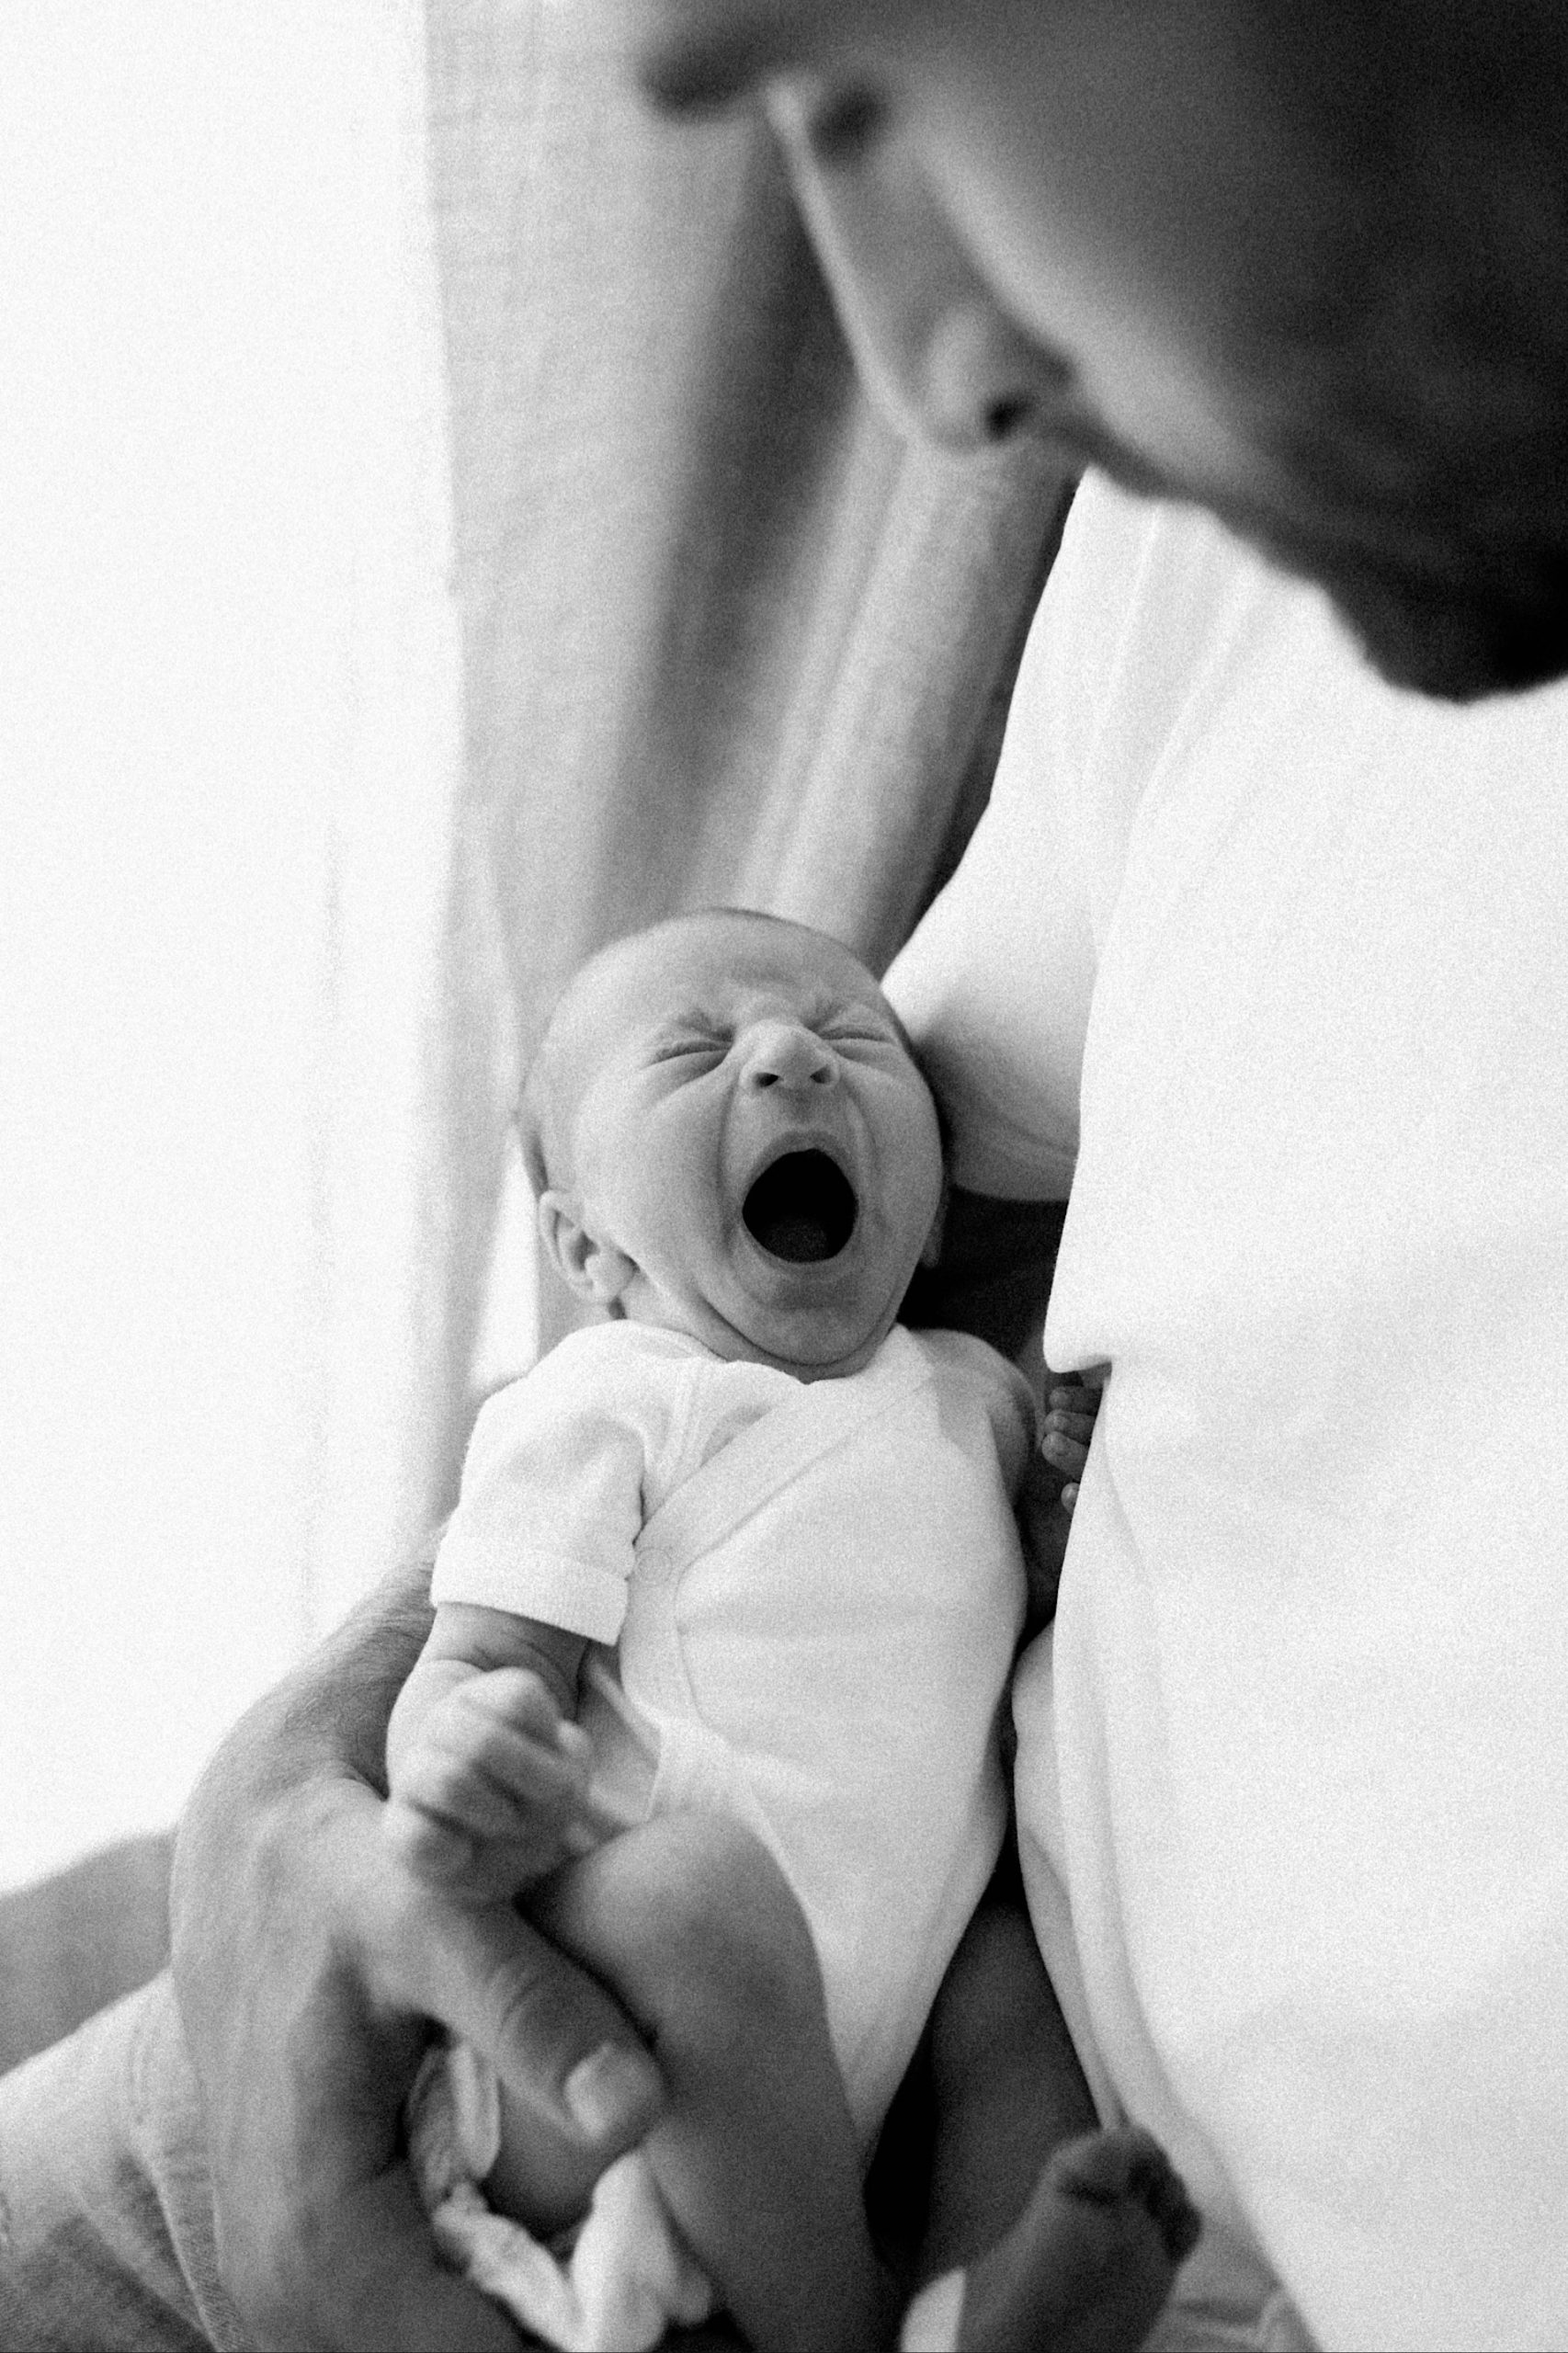 Black & White Italy Newborn Photography of a new baby yawning while in her Dad's arms, who is looking at her.